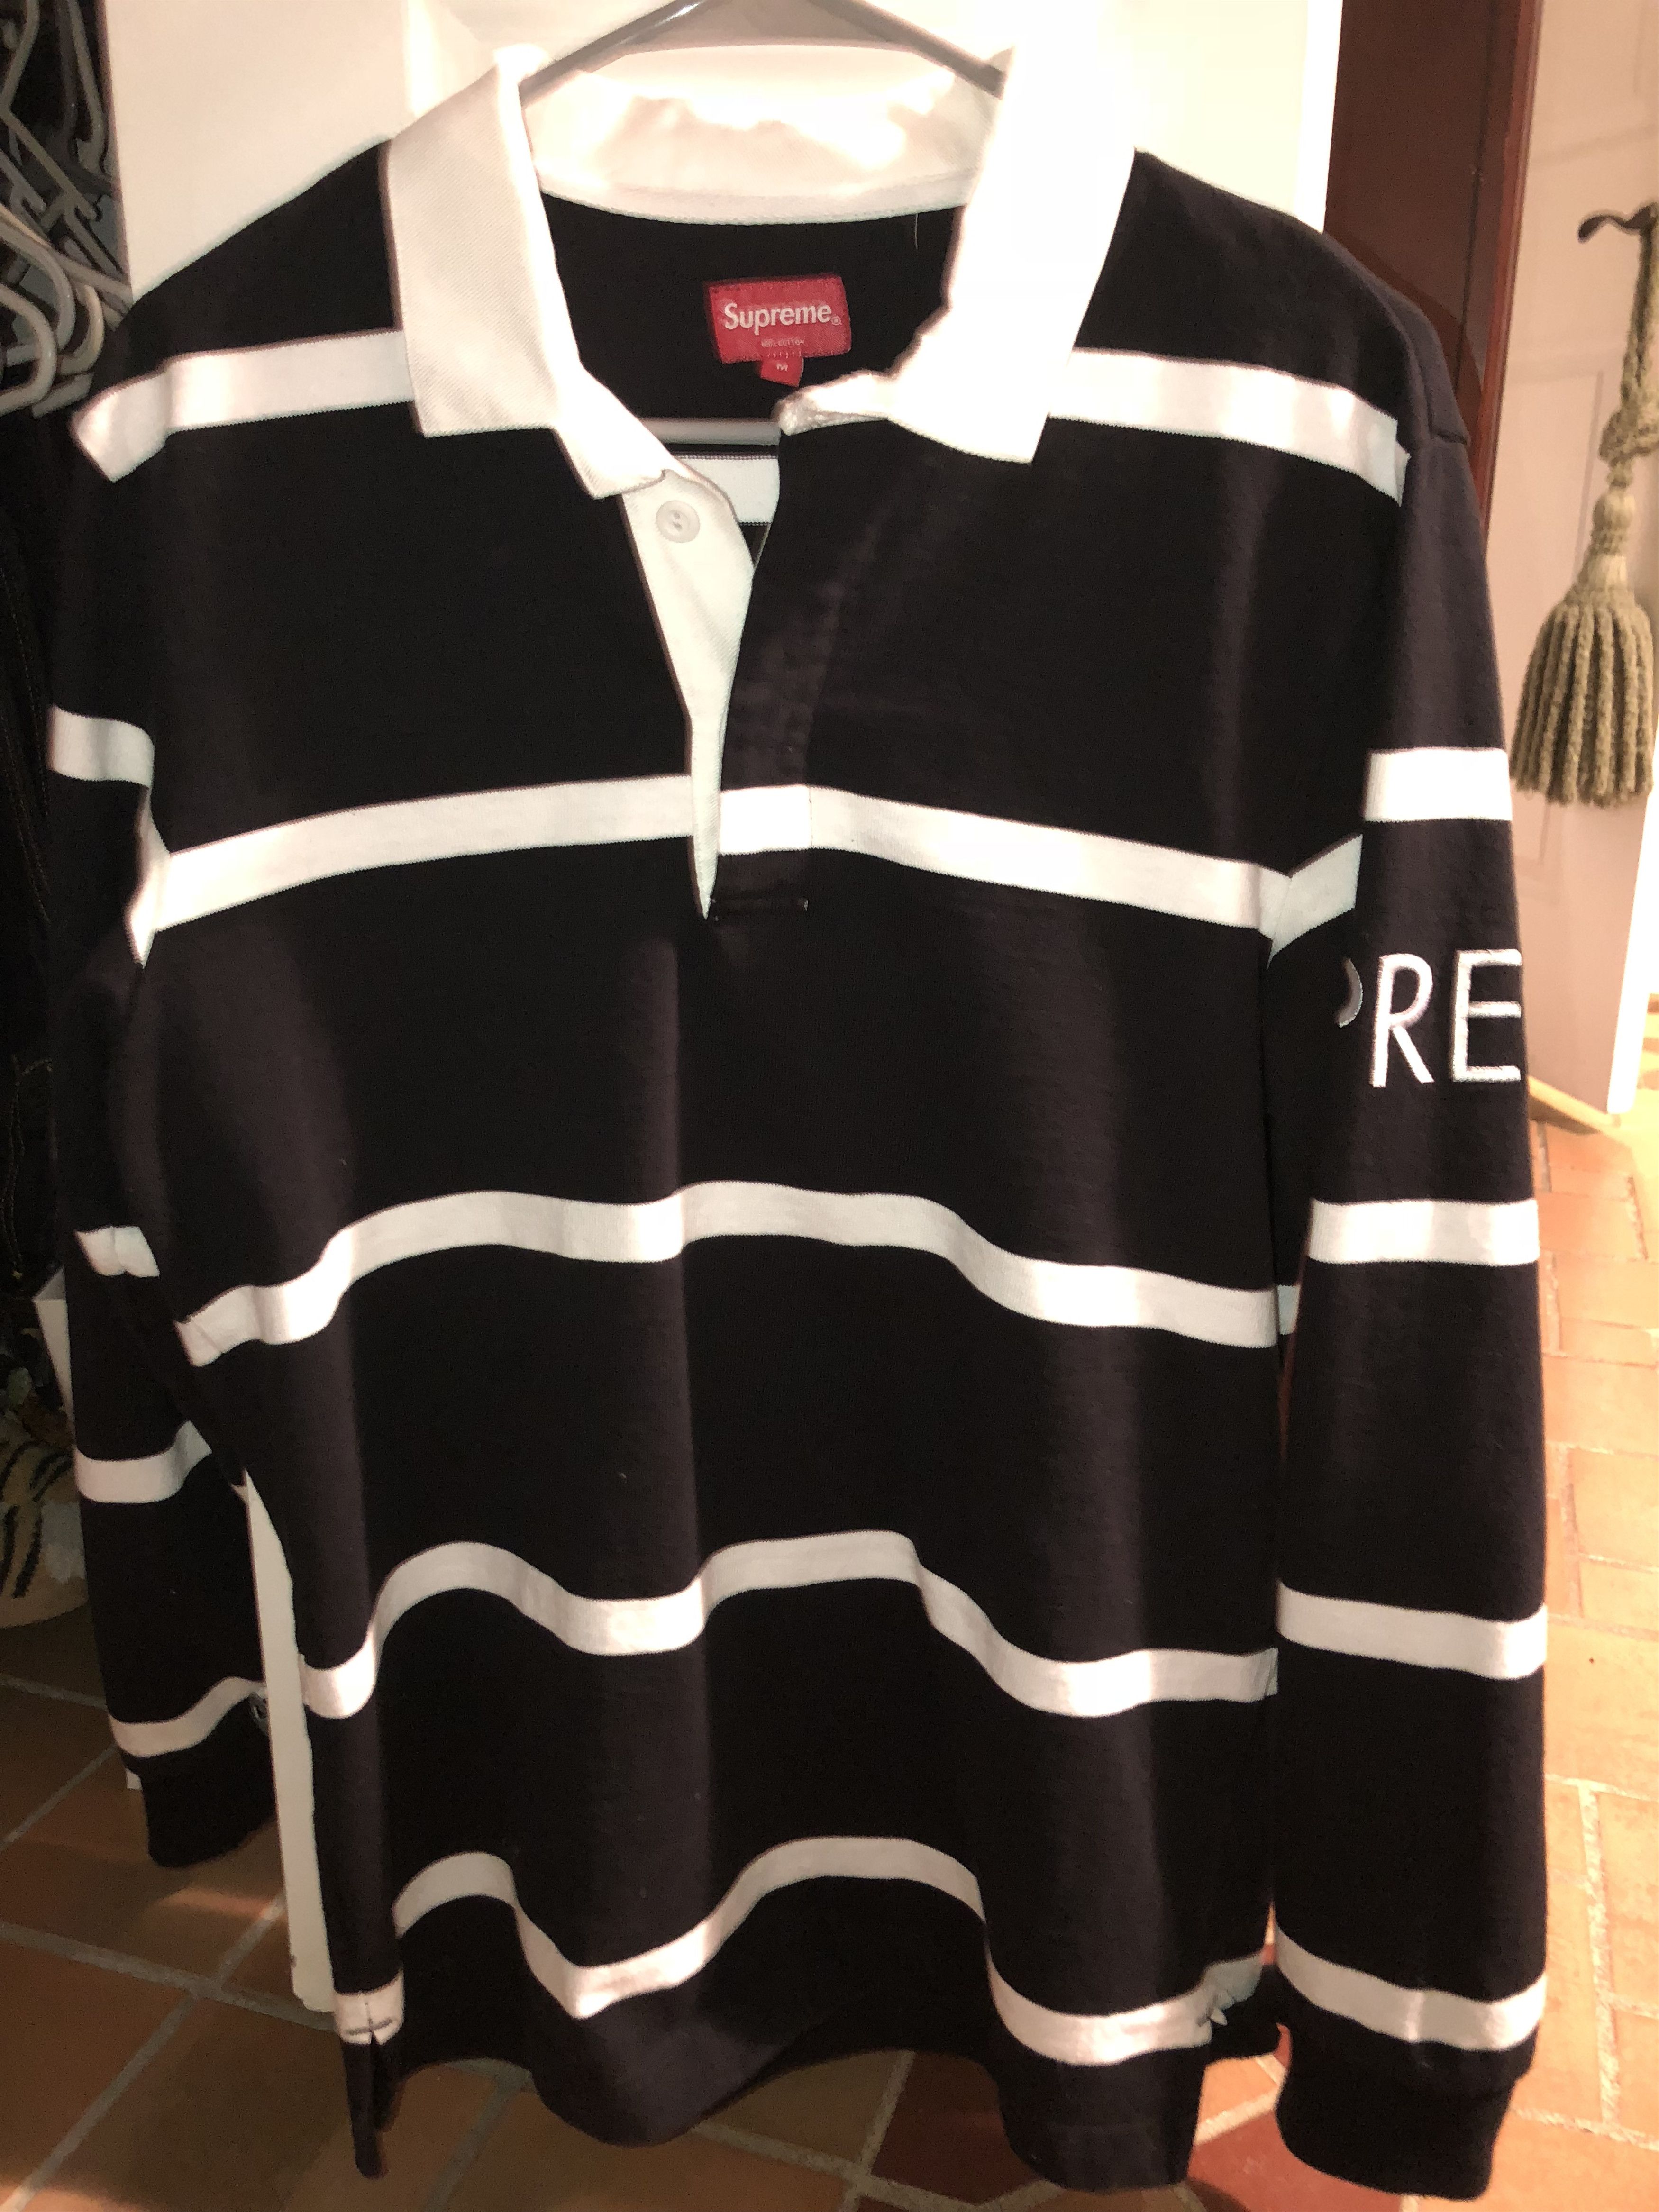 Supreme Supreme Rugby Shirt Black and White Stripes | Grailed